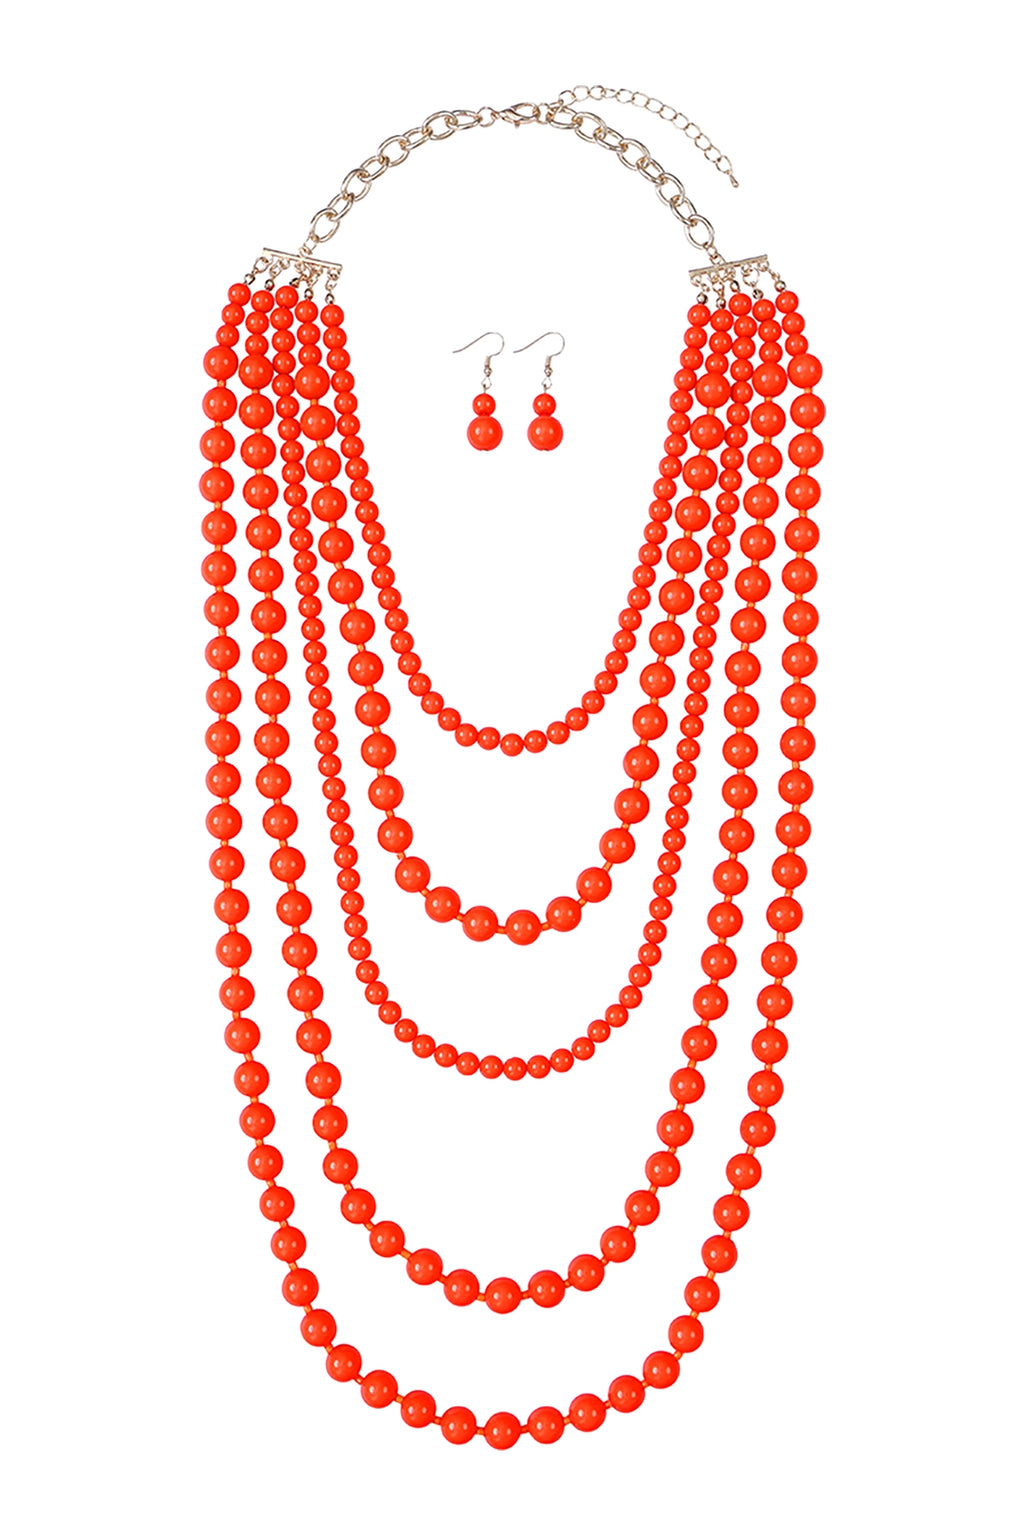 Multi Layered Beads Necklace and Earrings Set Coral - Pack of 6